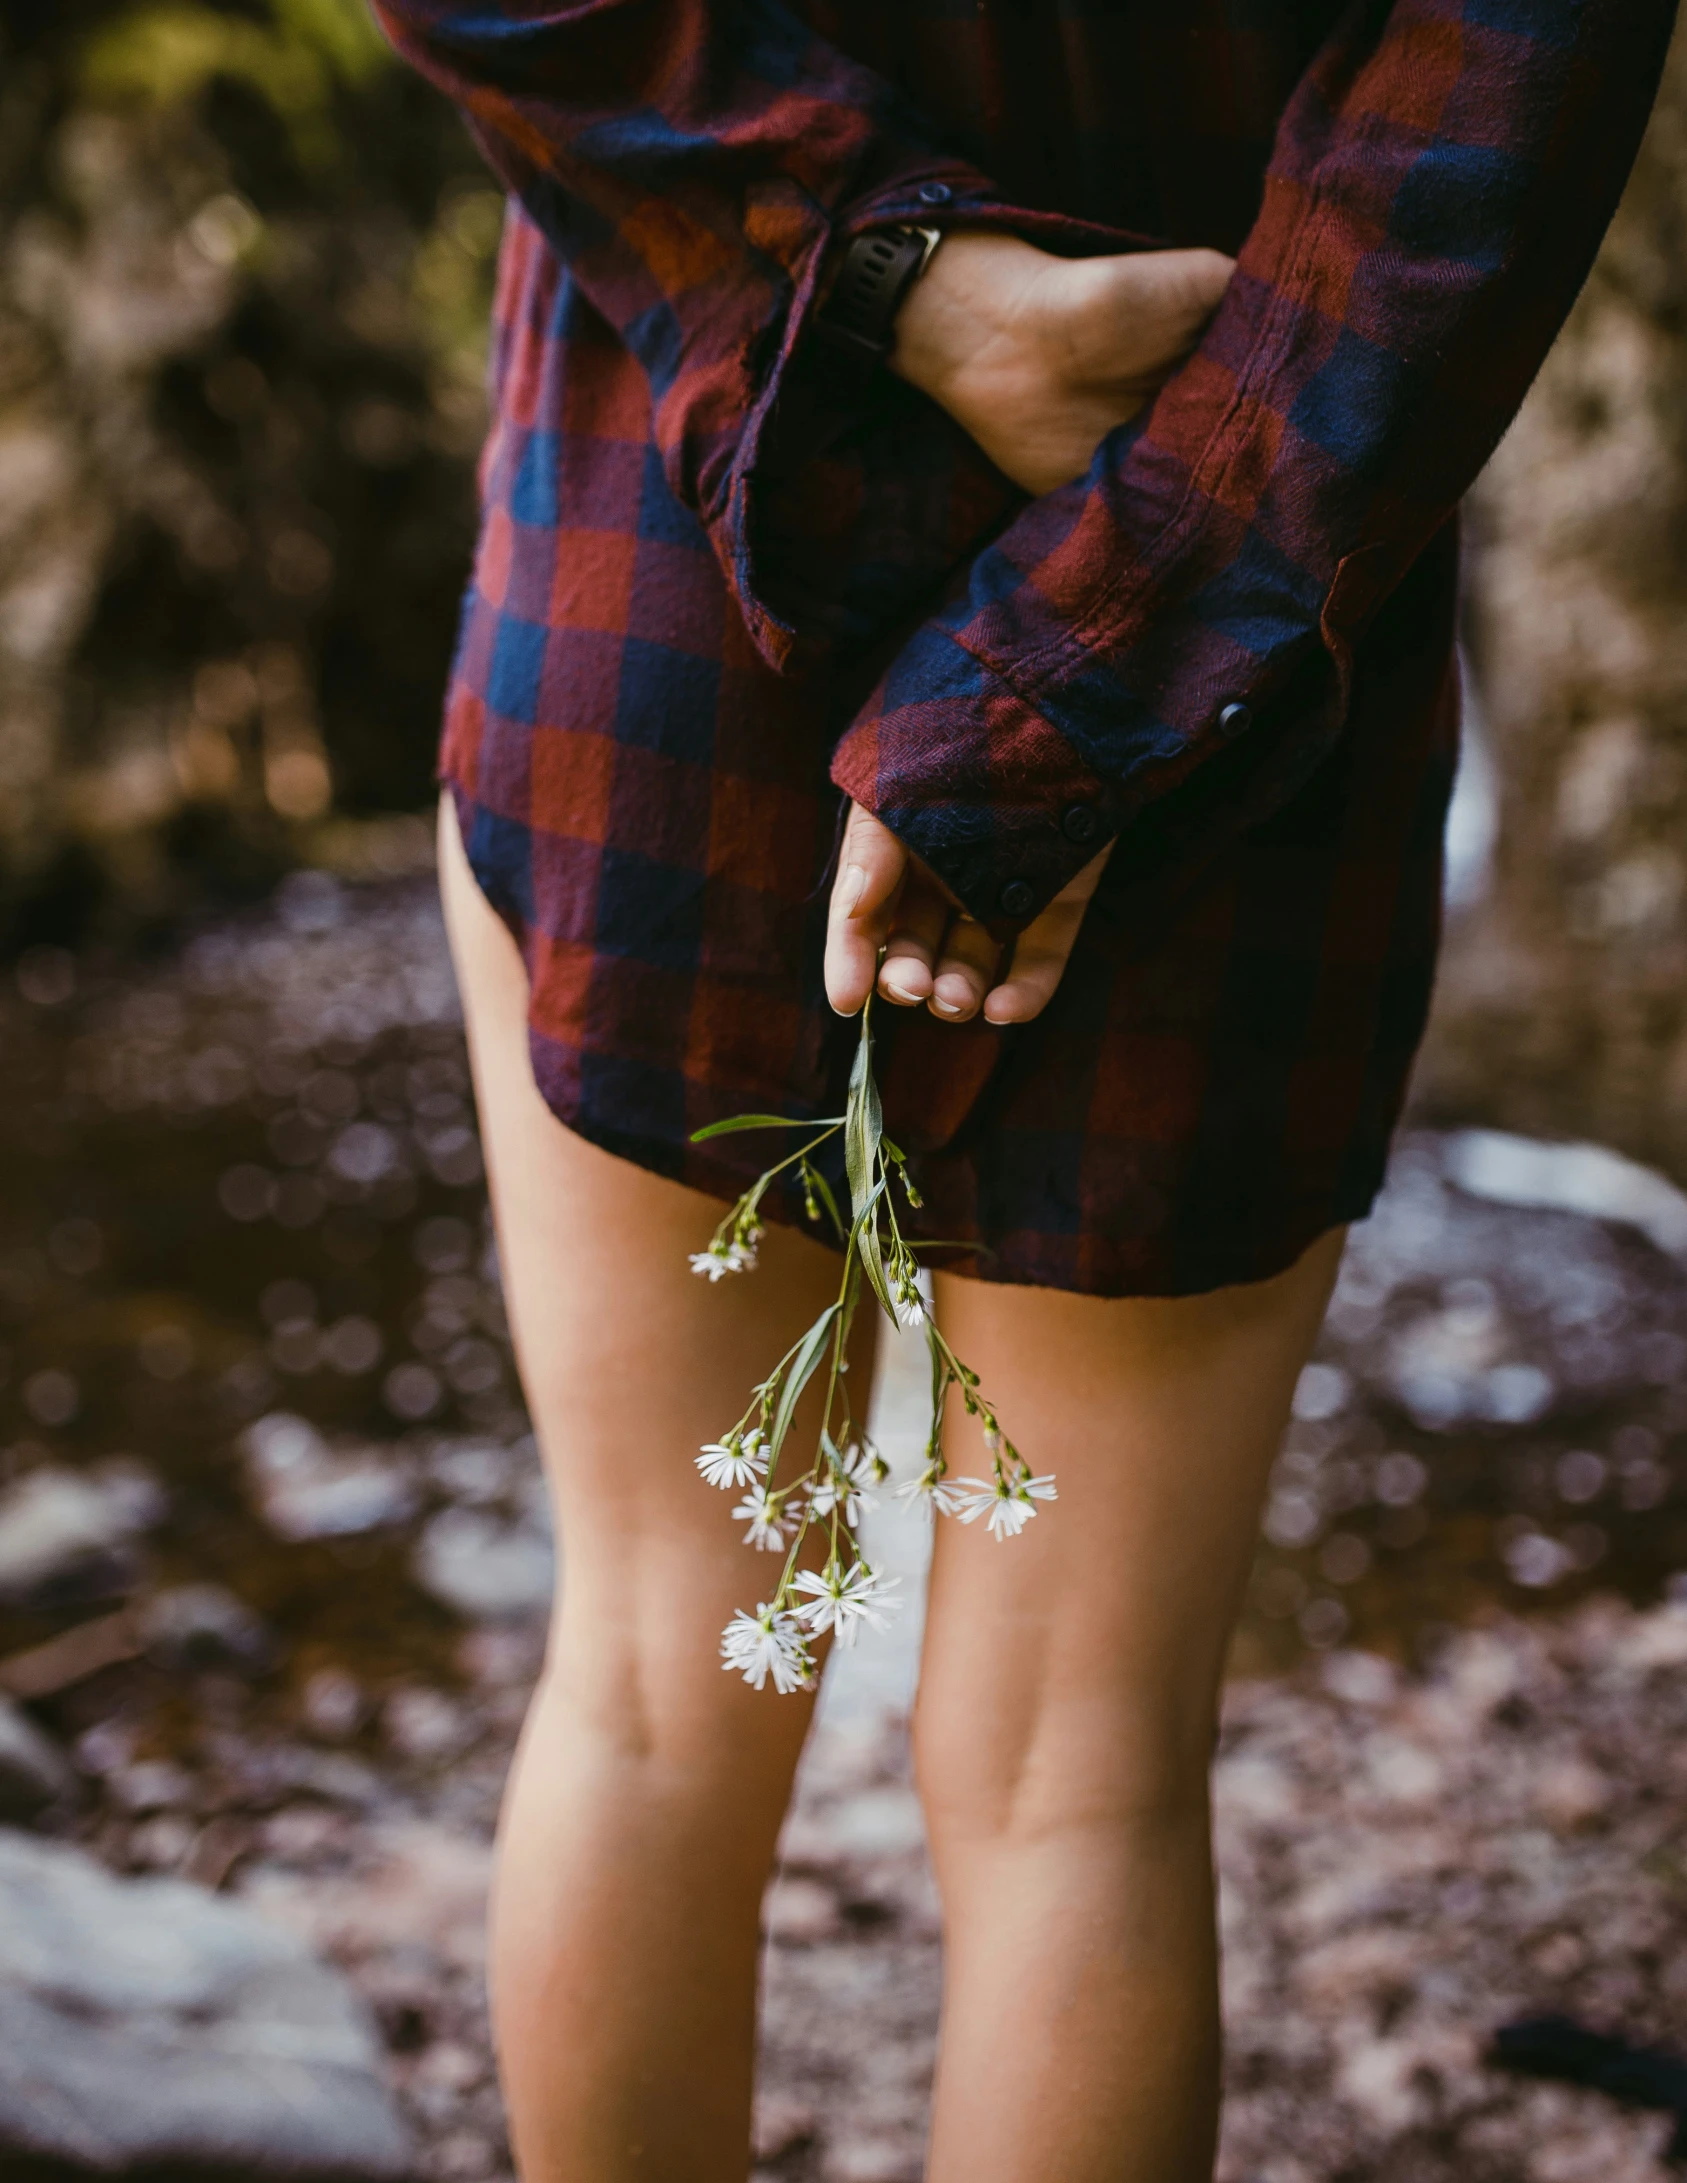 a girl is holding a small flower in her hand